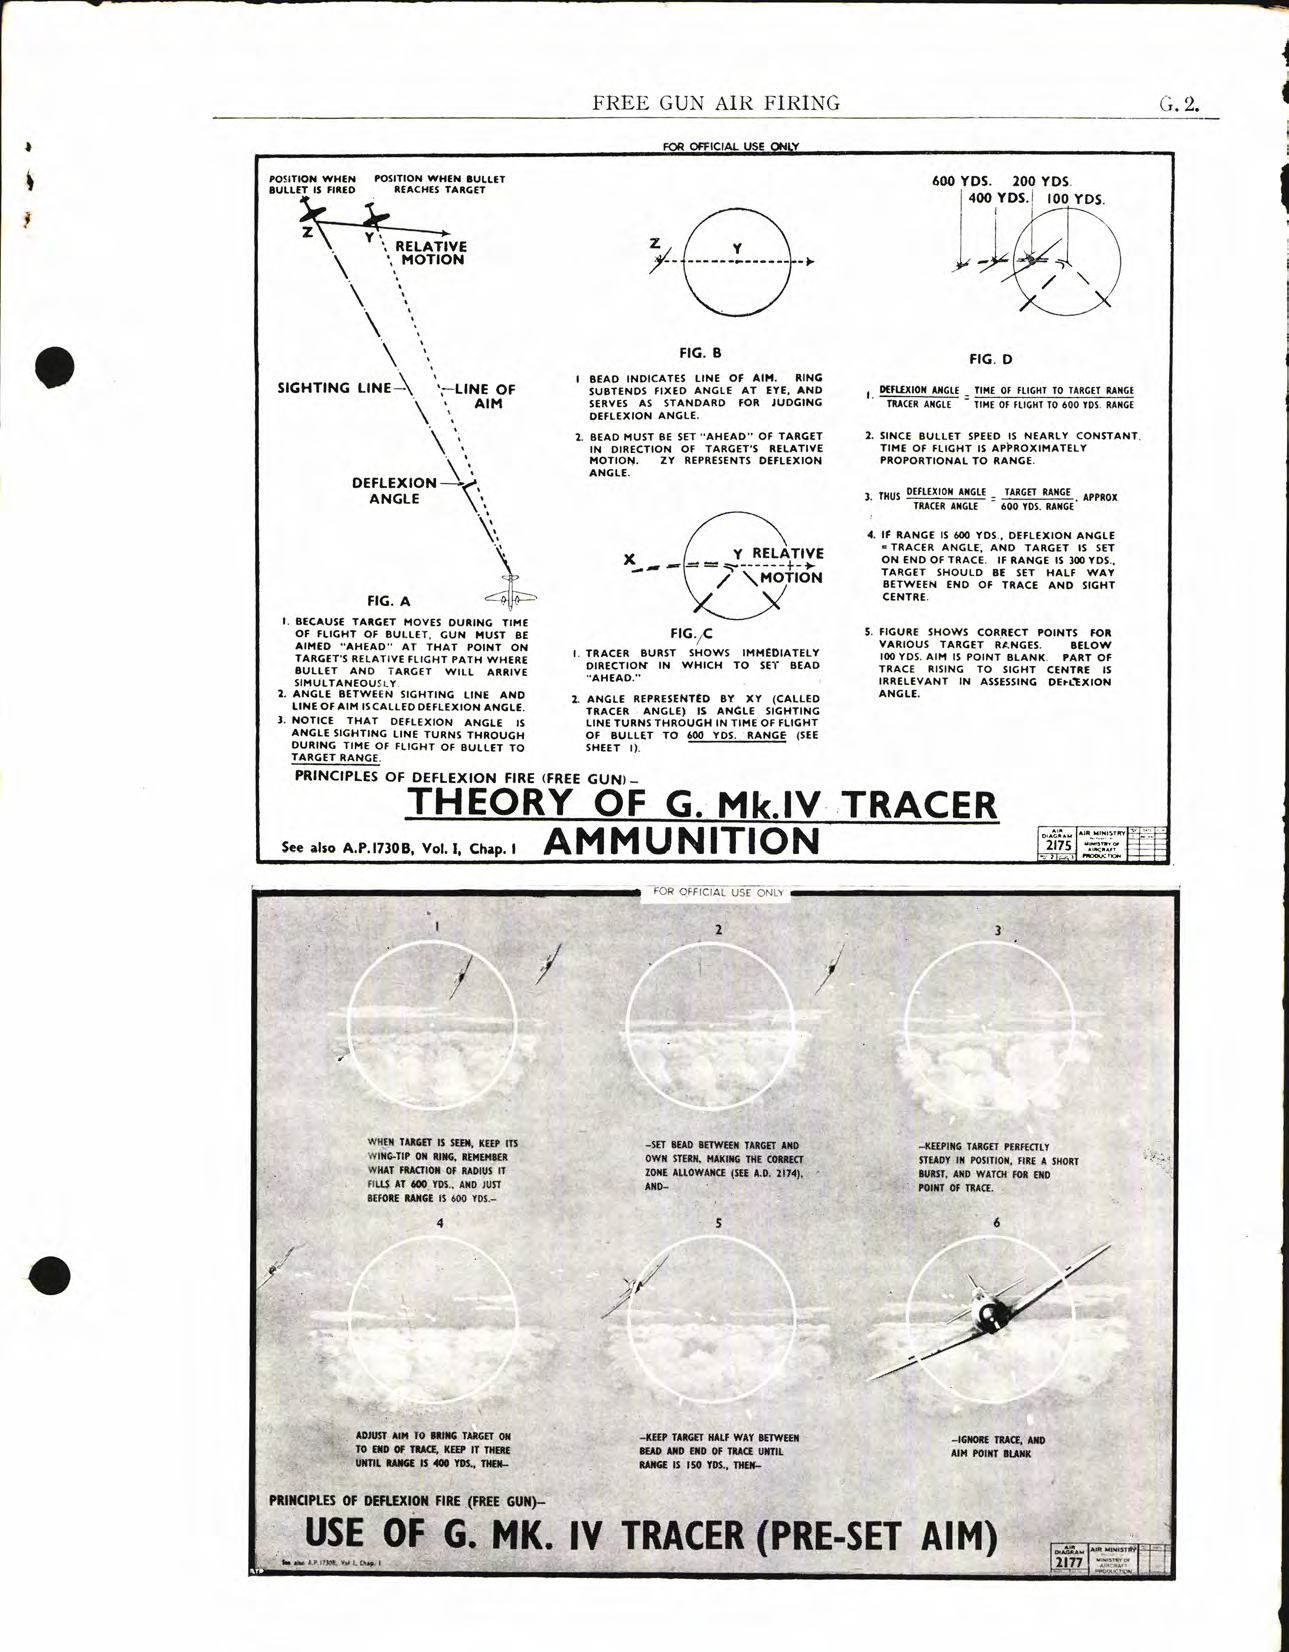 Sample page 7 from AirCorps Library document: Armament; Free Gun Air Firing, Notes for Students